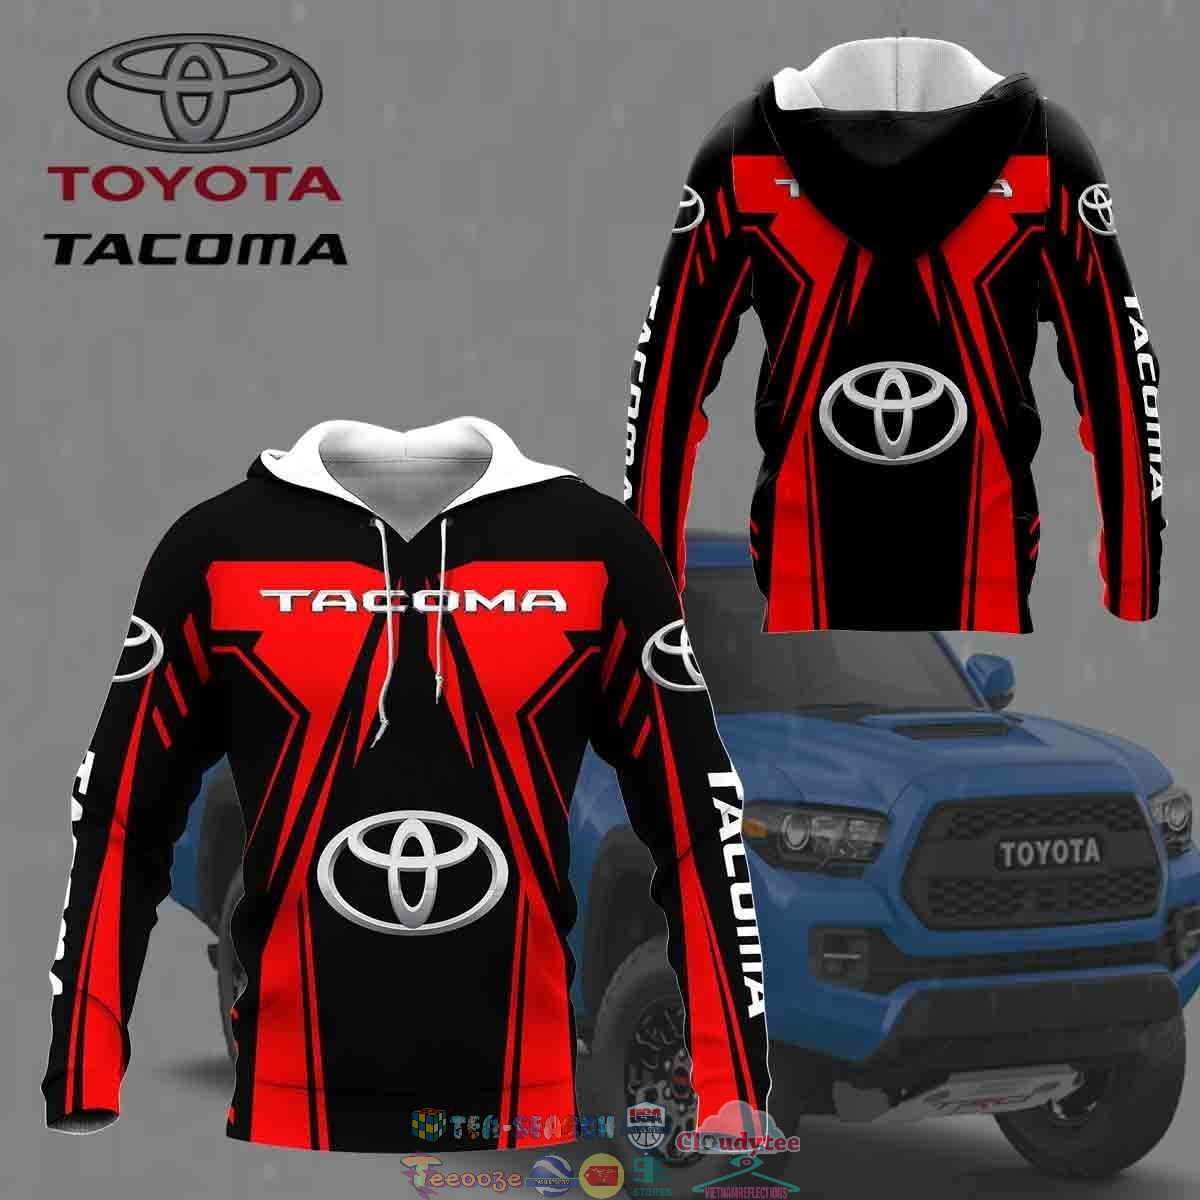 Toyota Tacoma ver 16 3D hoodie and t-shirt